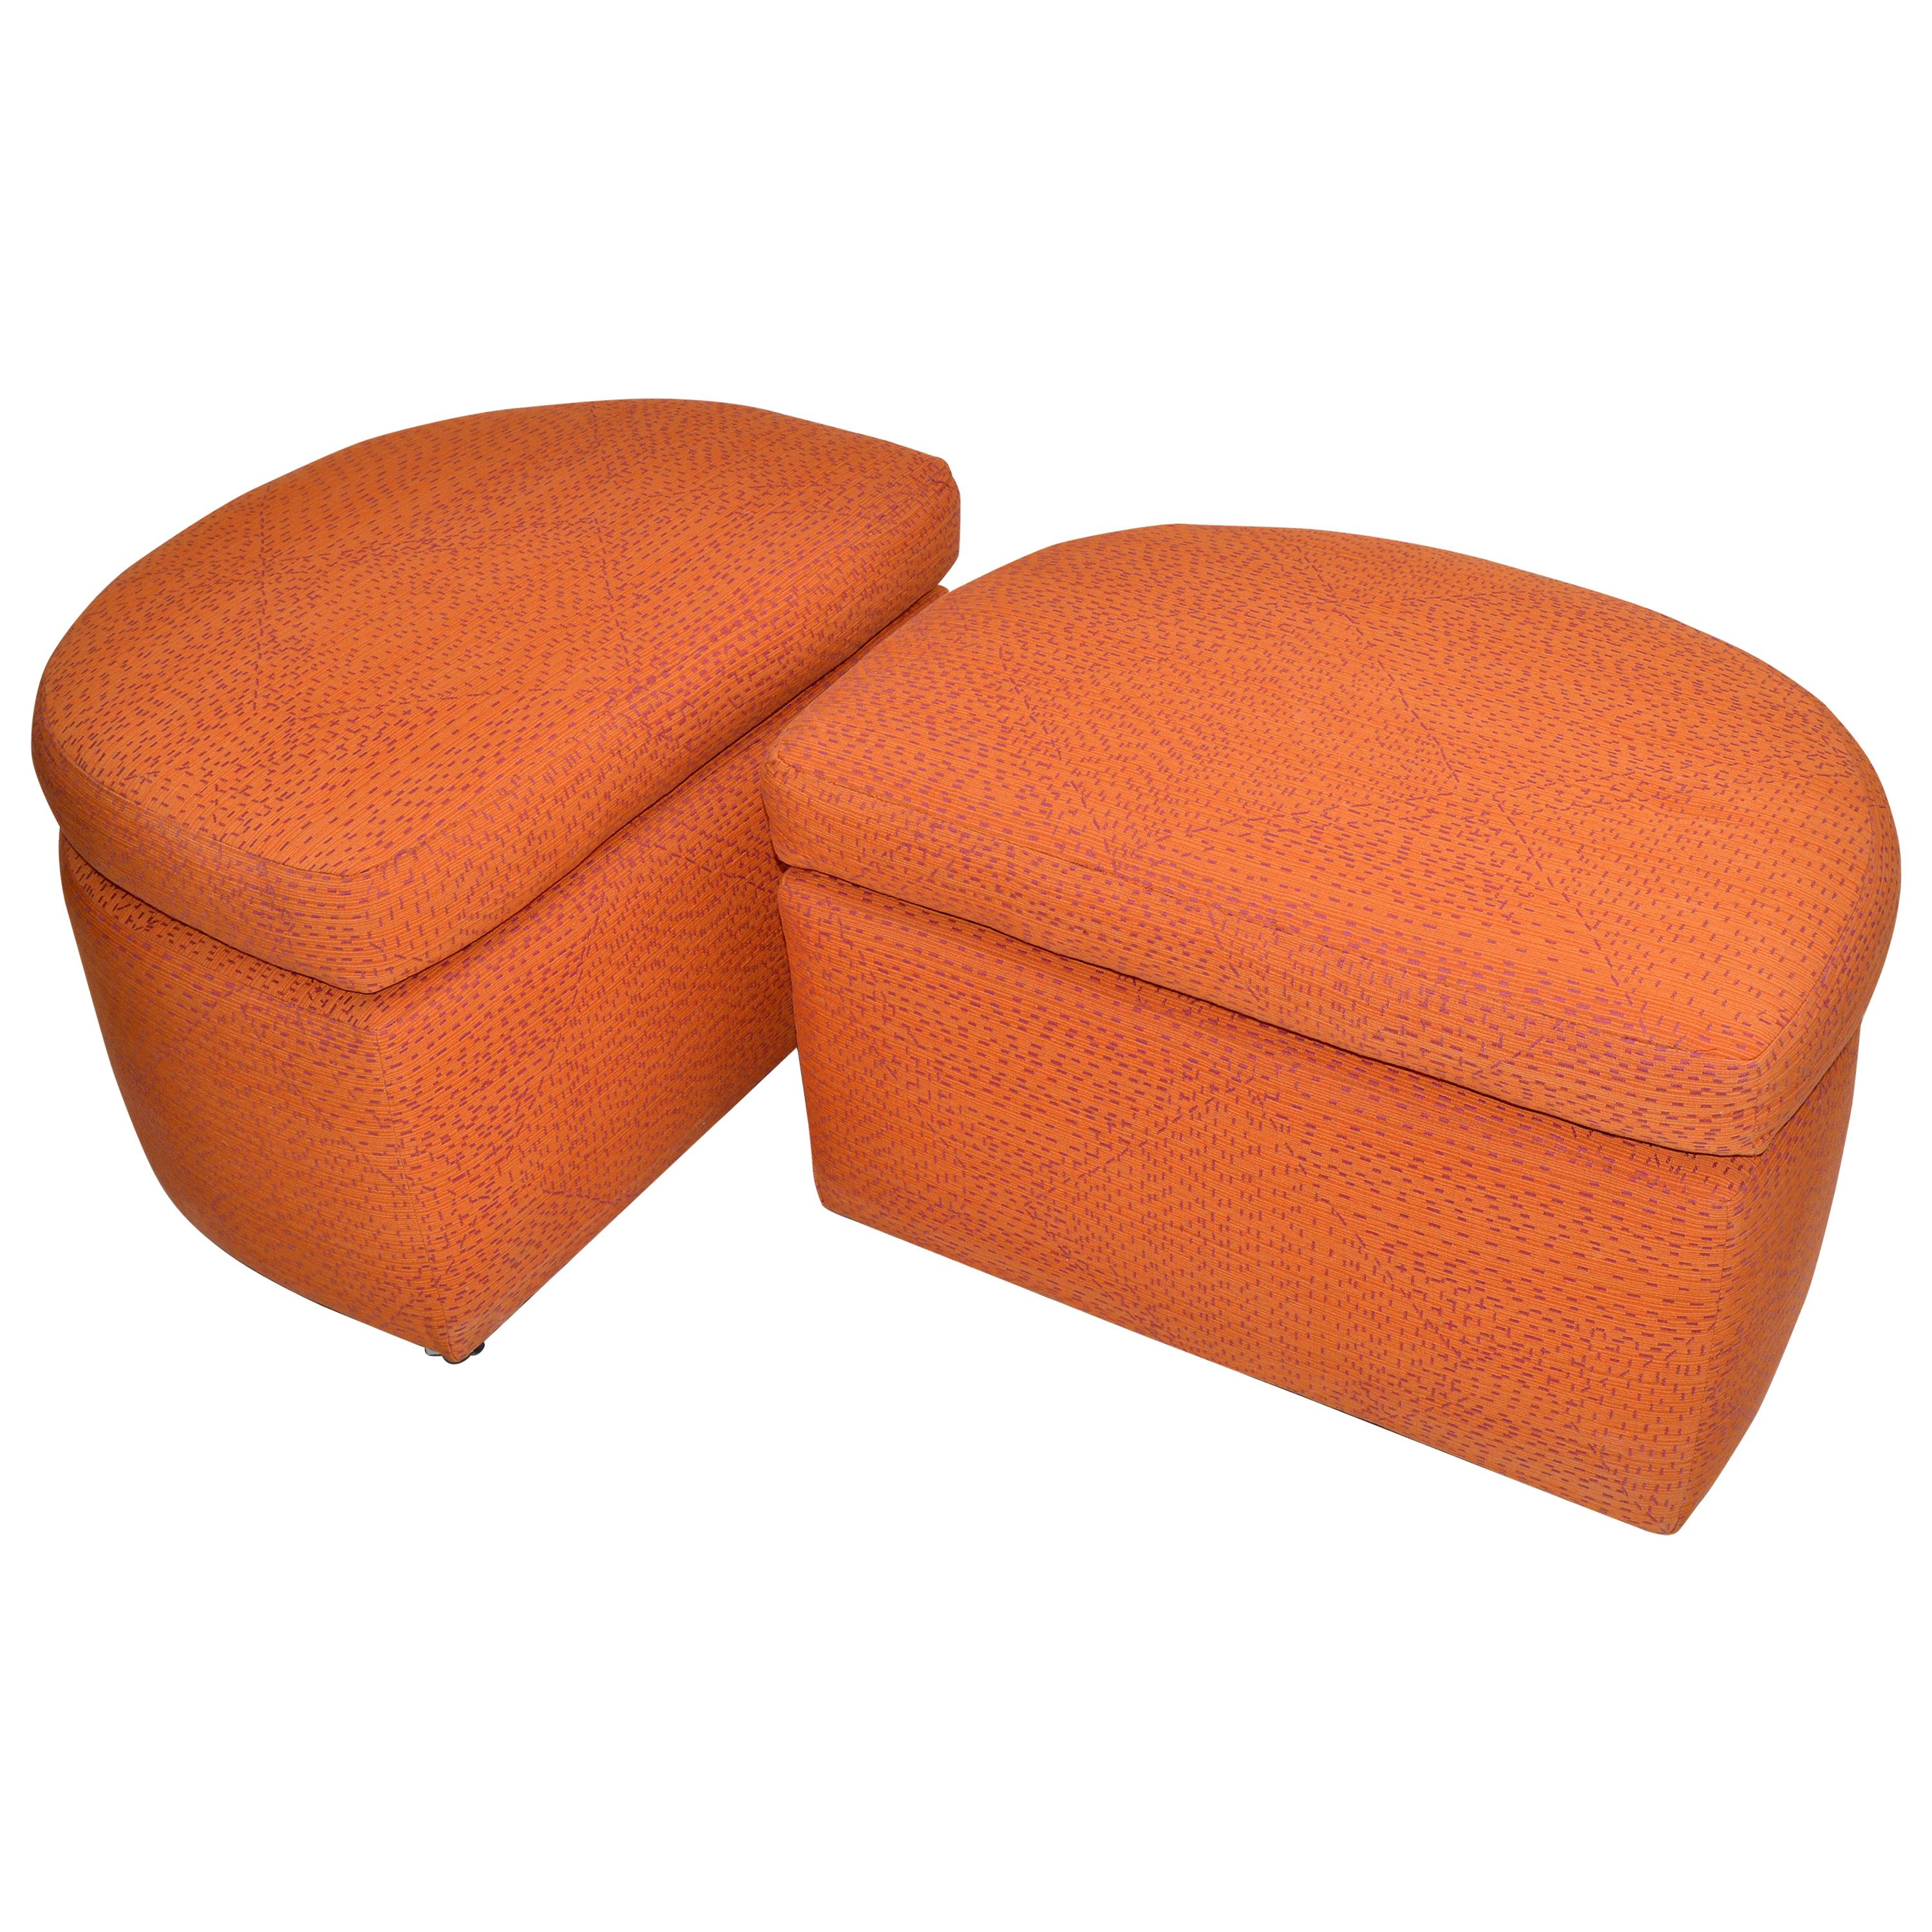 Mid-Century Modern Orange Cotton Upholstery Ottoman on Casters & Cushions - Pair For Sale